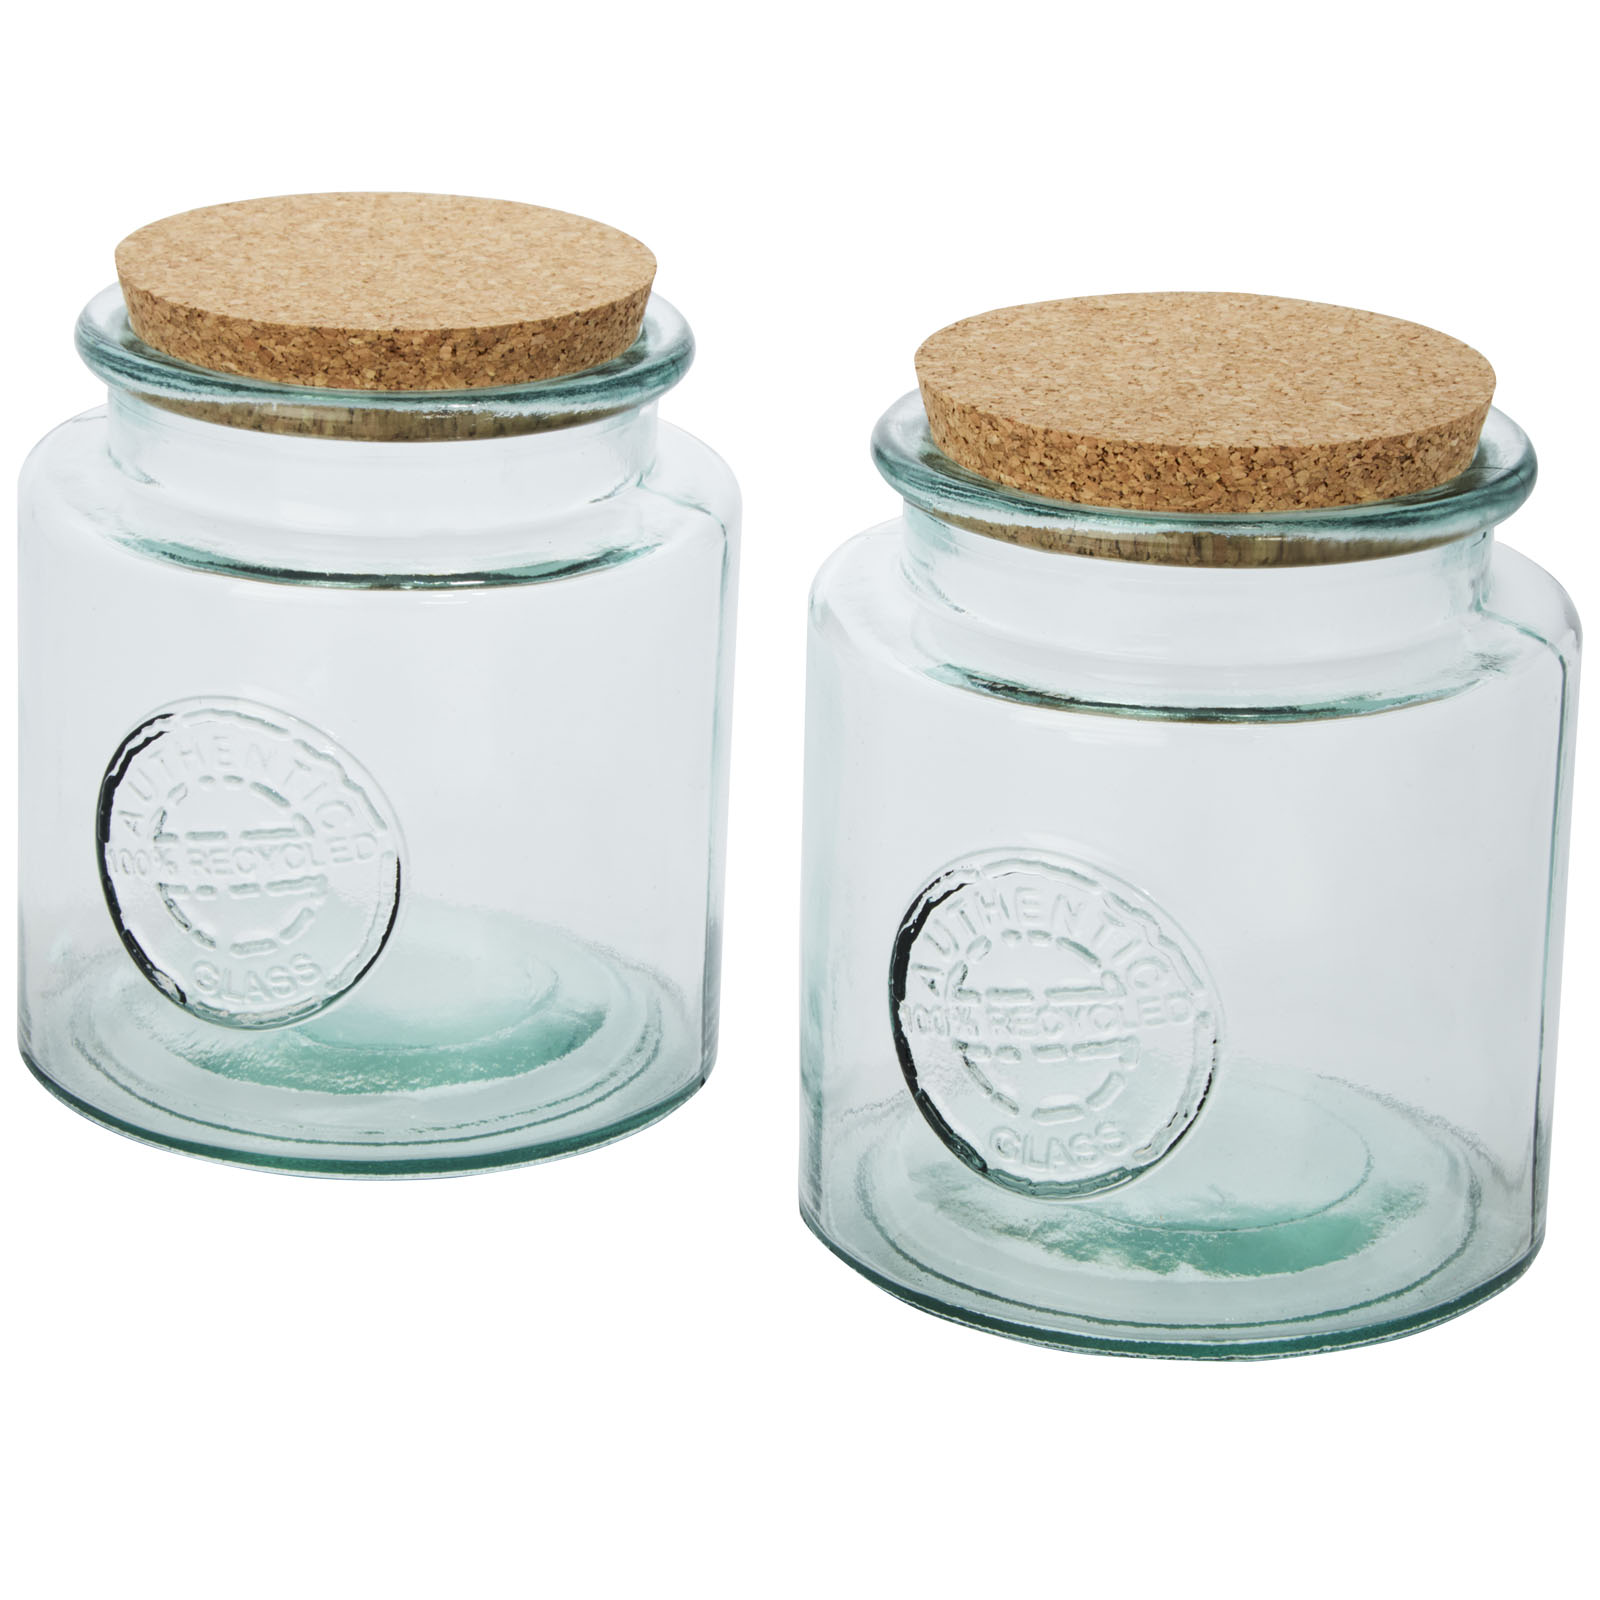 2-Piece Recycled Glass Dry Food Container Set with Cork Lid - Peterhead